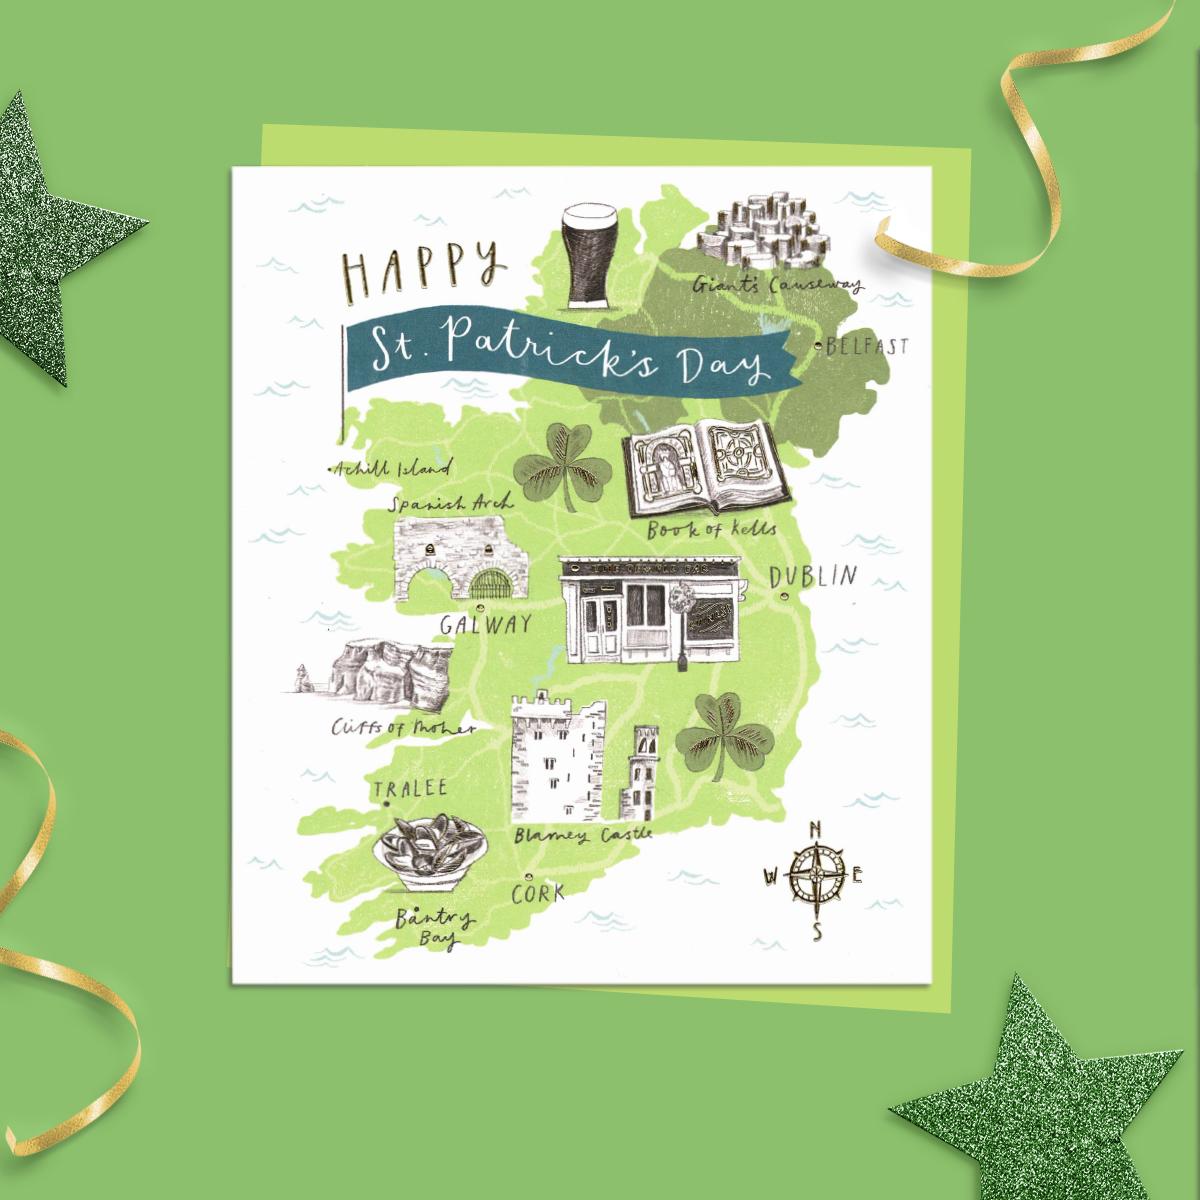 ' Happy St. Patrick's Day' Showing Map And Landmarks. With Lime Green Envelope